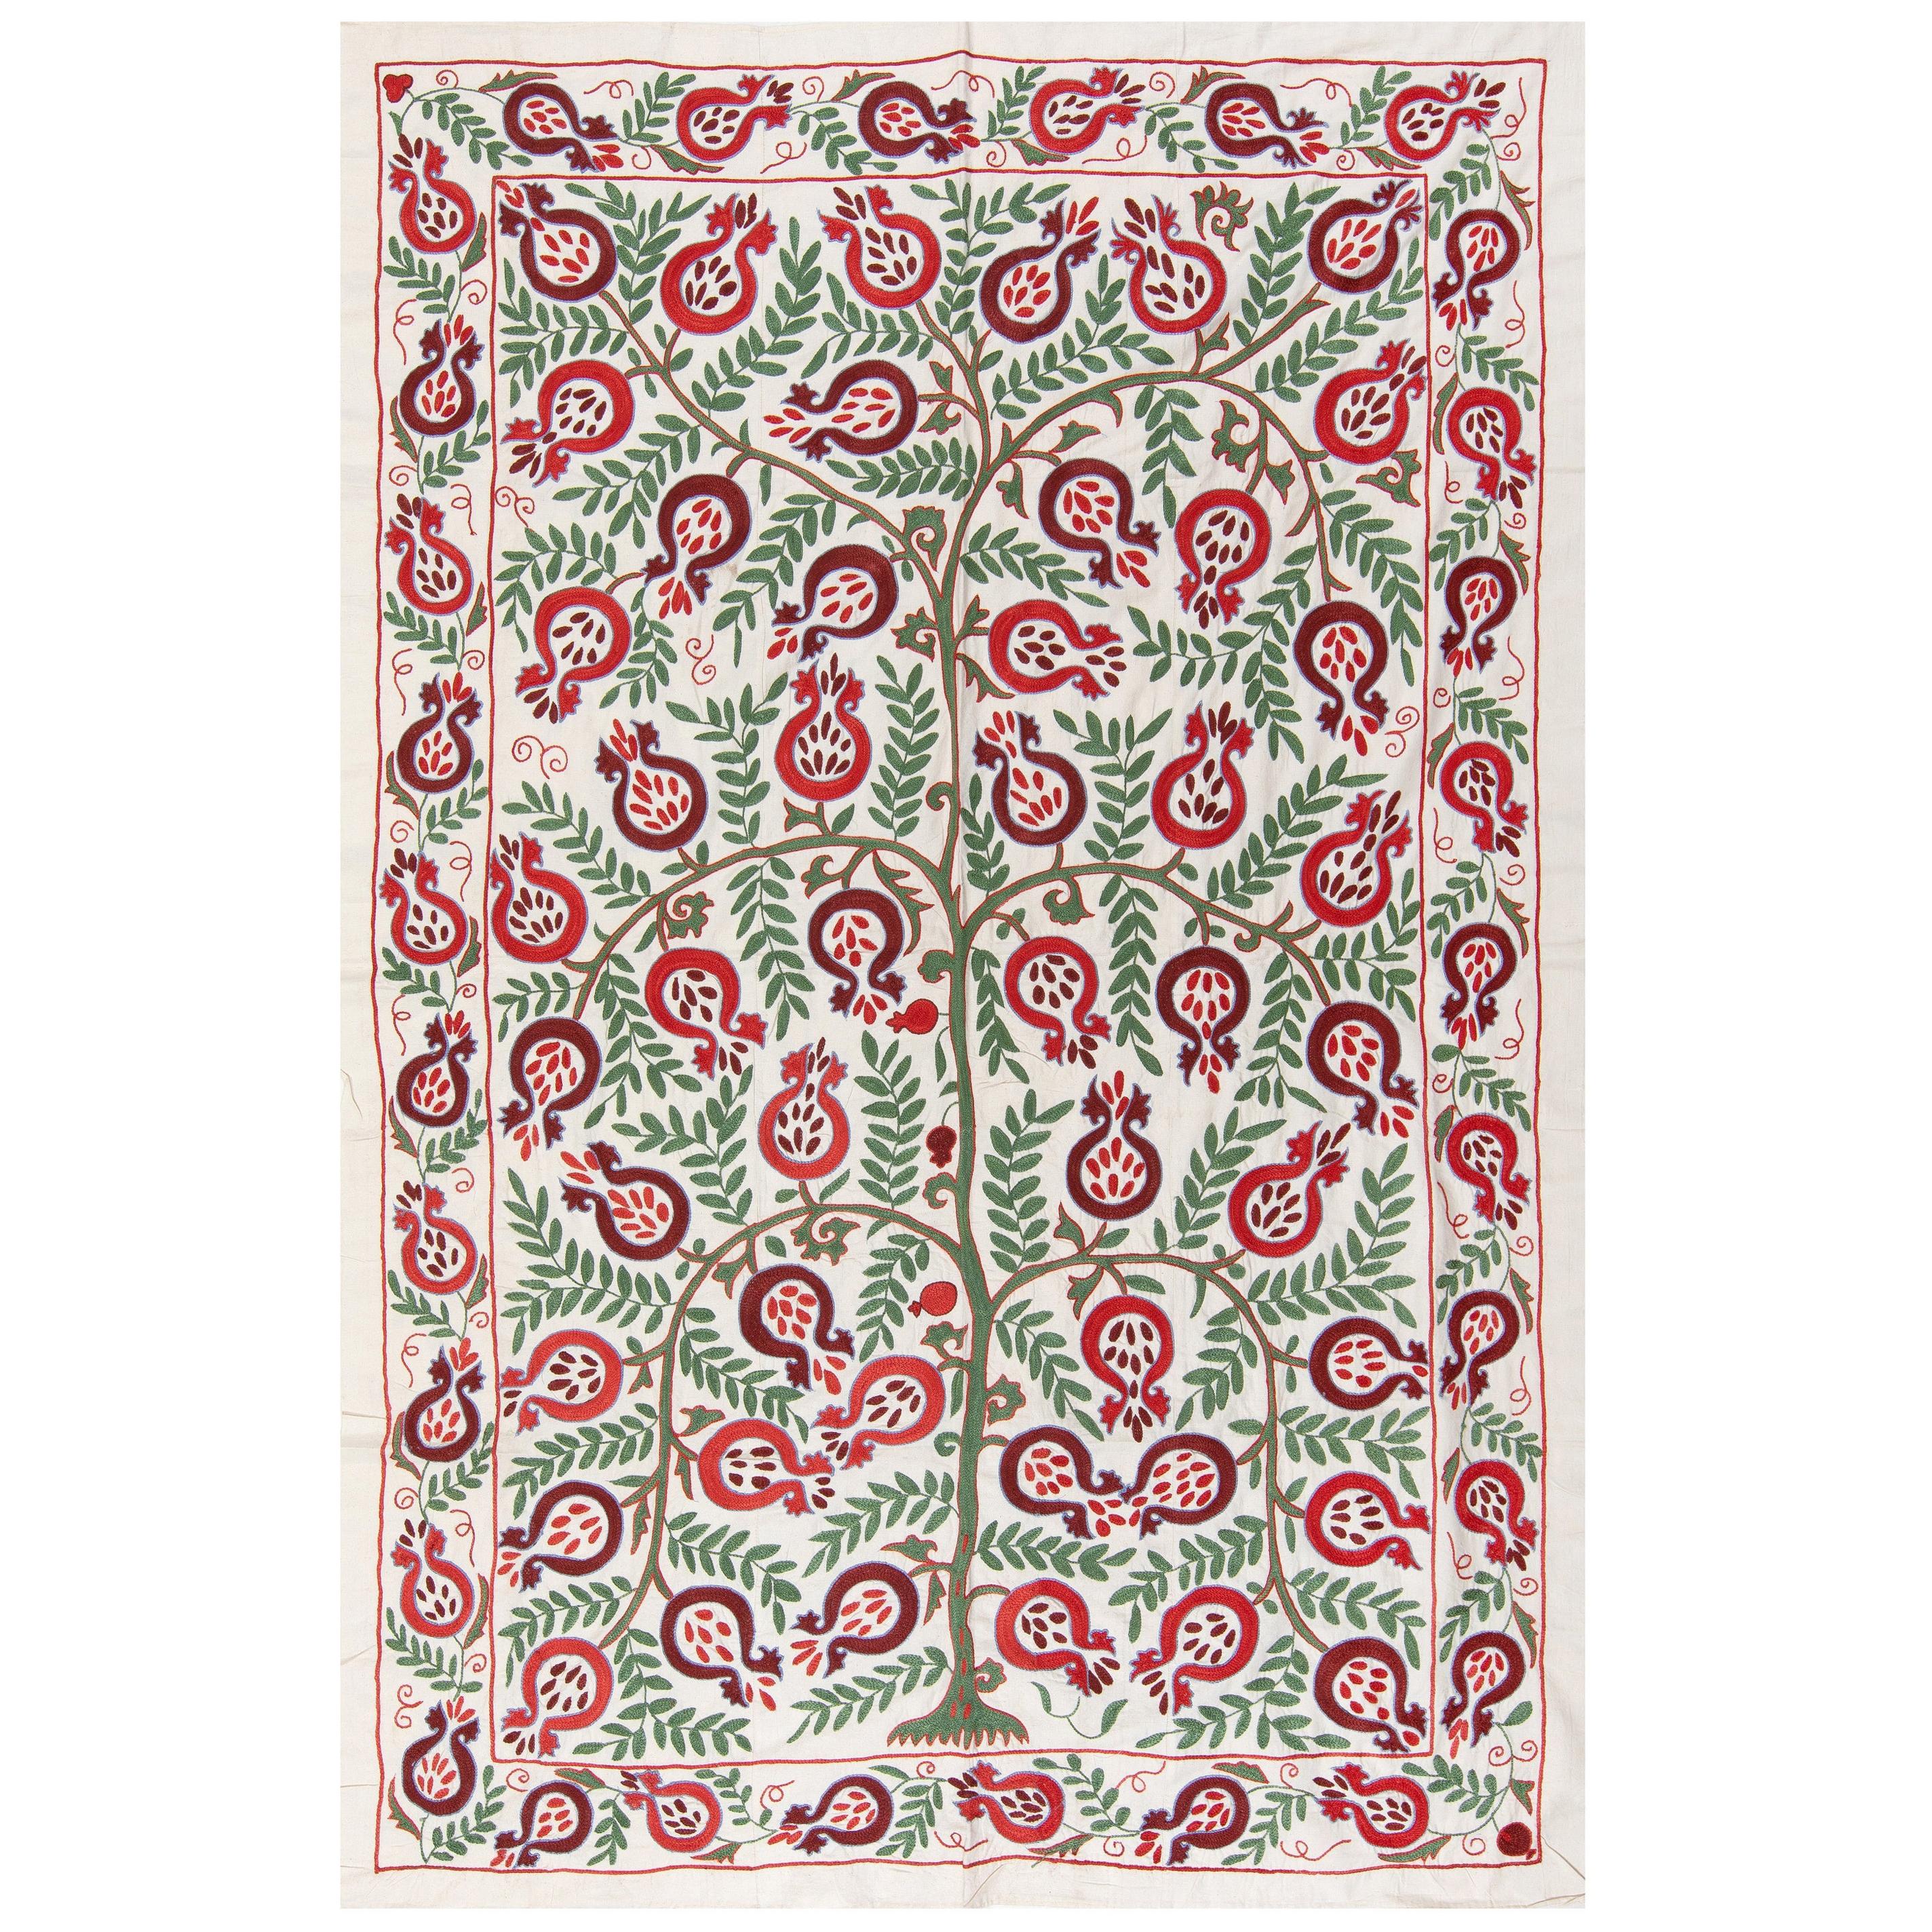 4.7x7 Ft Silk Suzani Pomegranate Tree Design Wall Hanging, Embroidered Bedspread